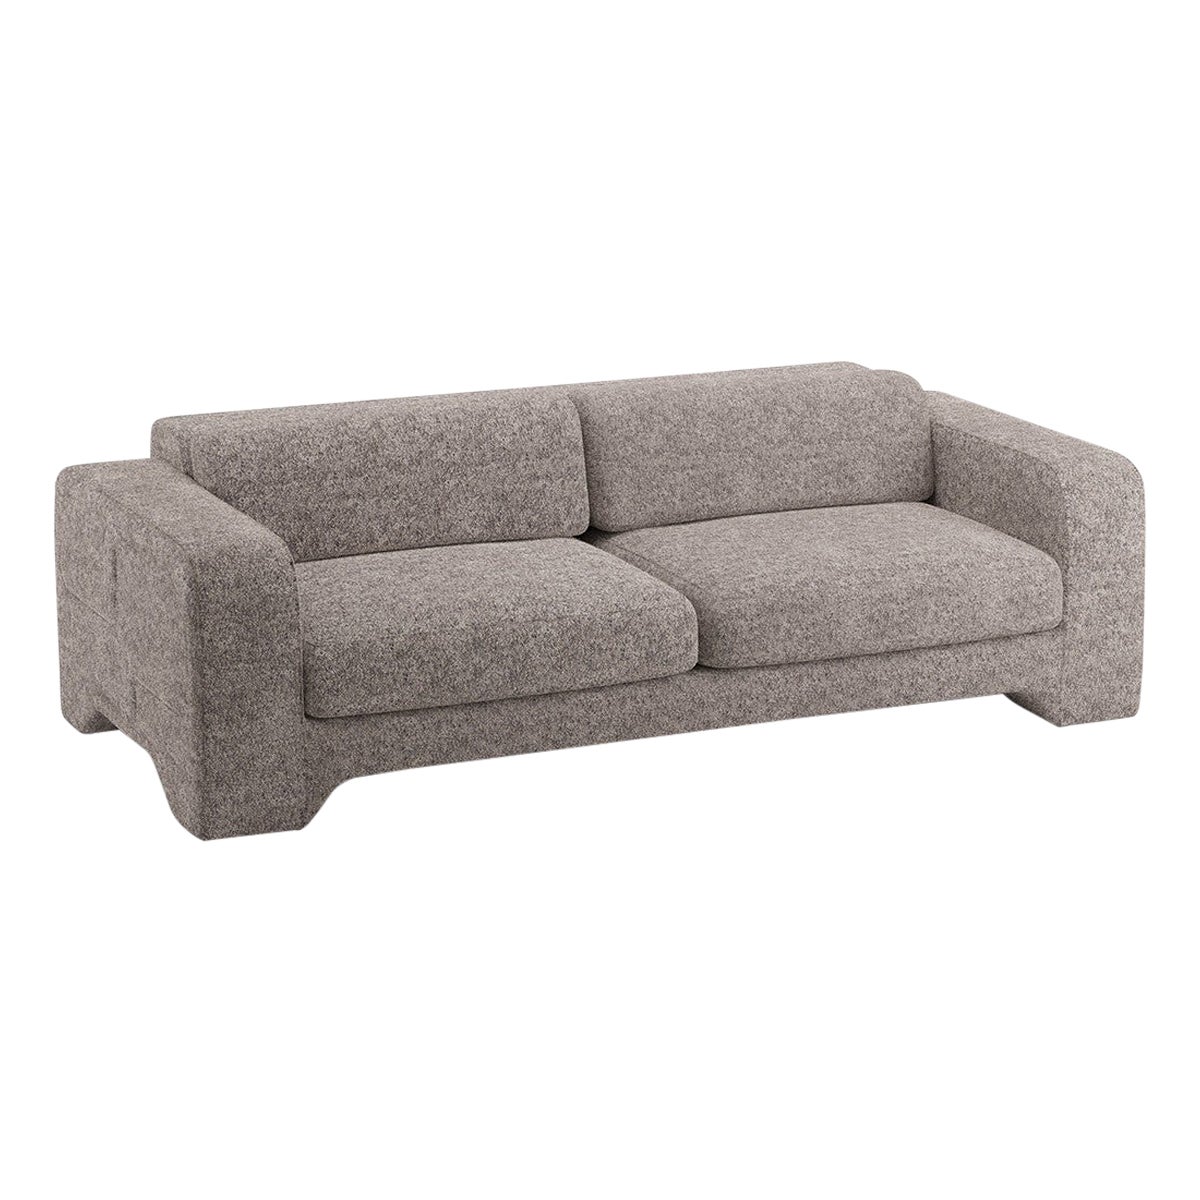 Popus Editions Giovanna 2.5 Seater Sofa in Anthracite Antwerp Linen Upholstery For Sale